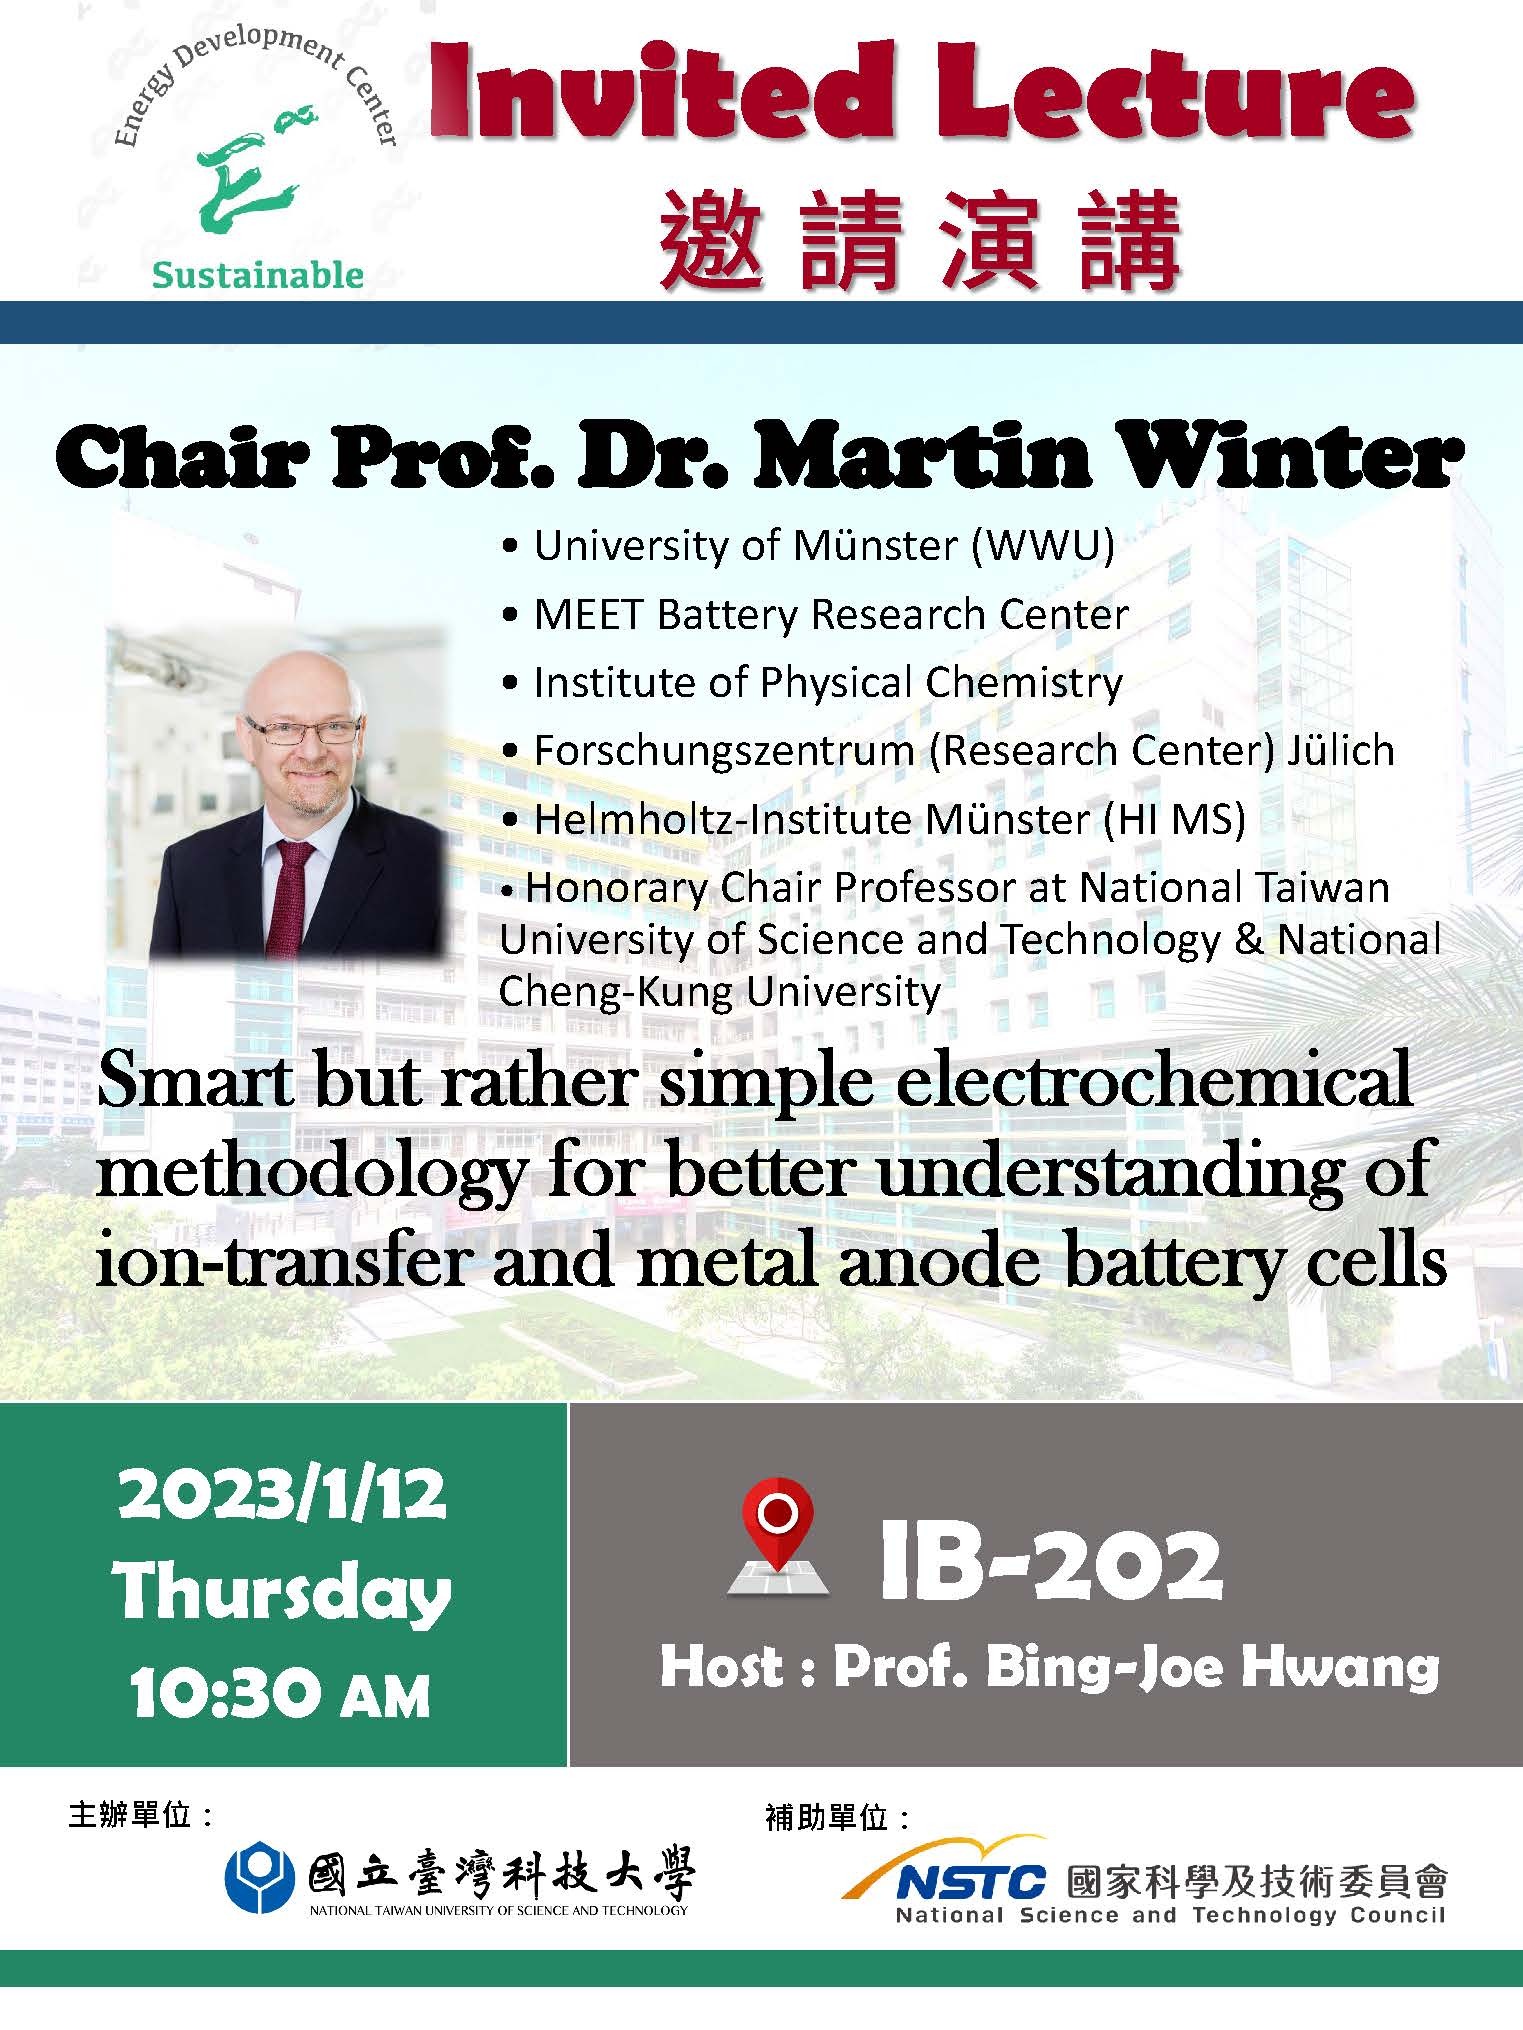 Energy Development tenter Invited Lecture Sustainable 邀請演講 Chair Prof. Dr. Martin Winter